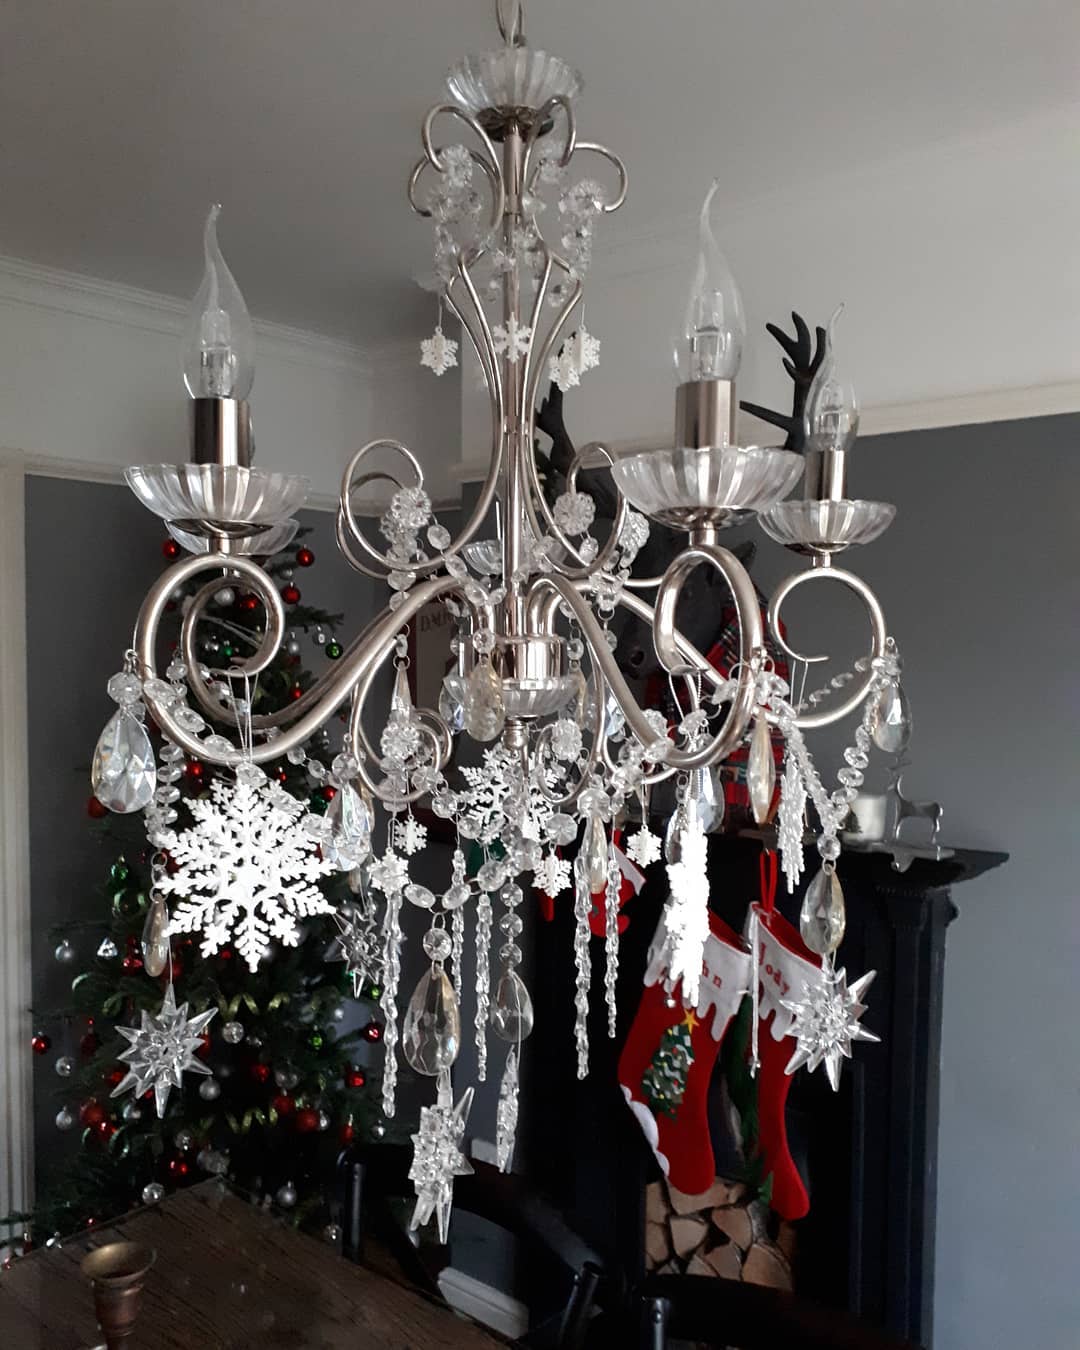 Festive chandelier with the addition of snowflakes and icicles.